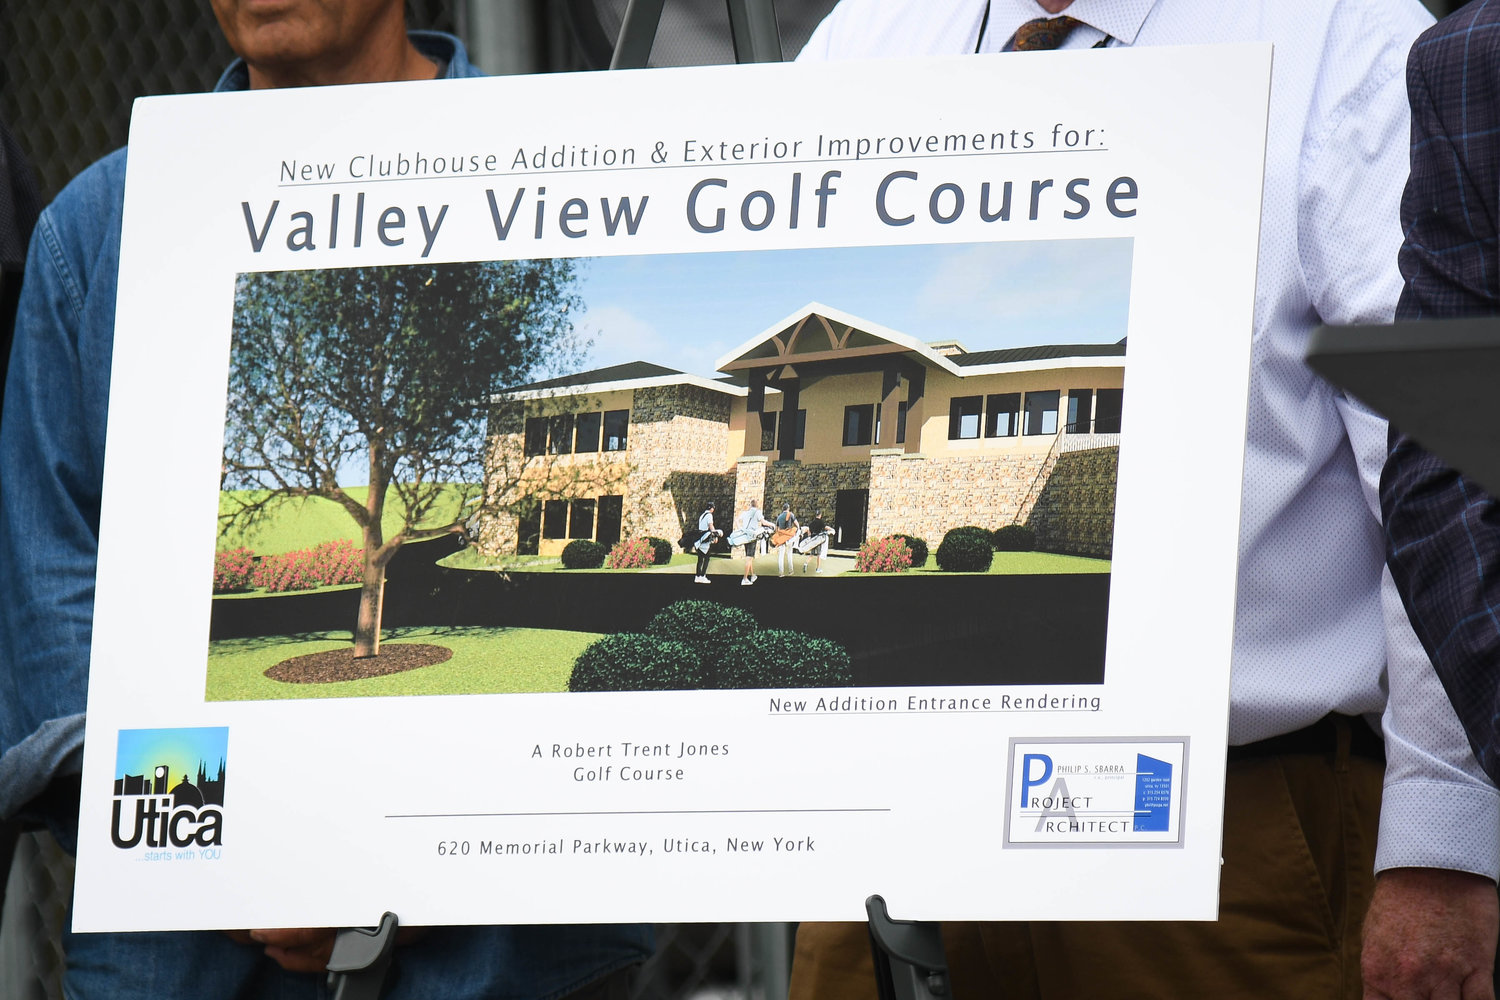 An artist’s rendering of the renovated and expansion project for the Bertolini Clubhouse at Valley View Golf Course in Utica as shown during a press conference outlining the project earlier this month.